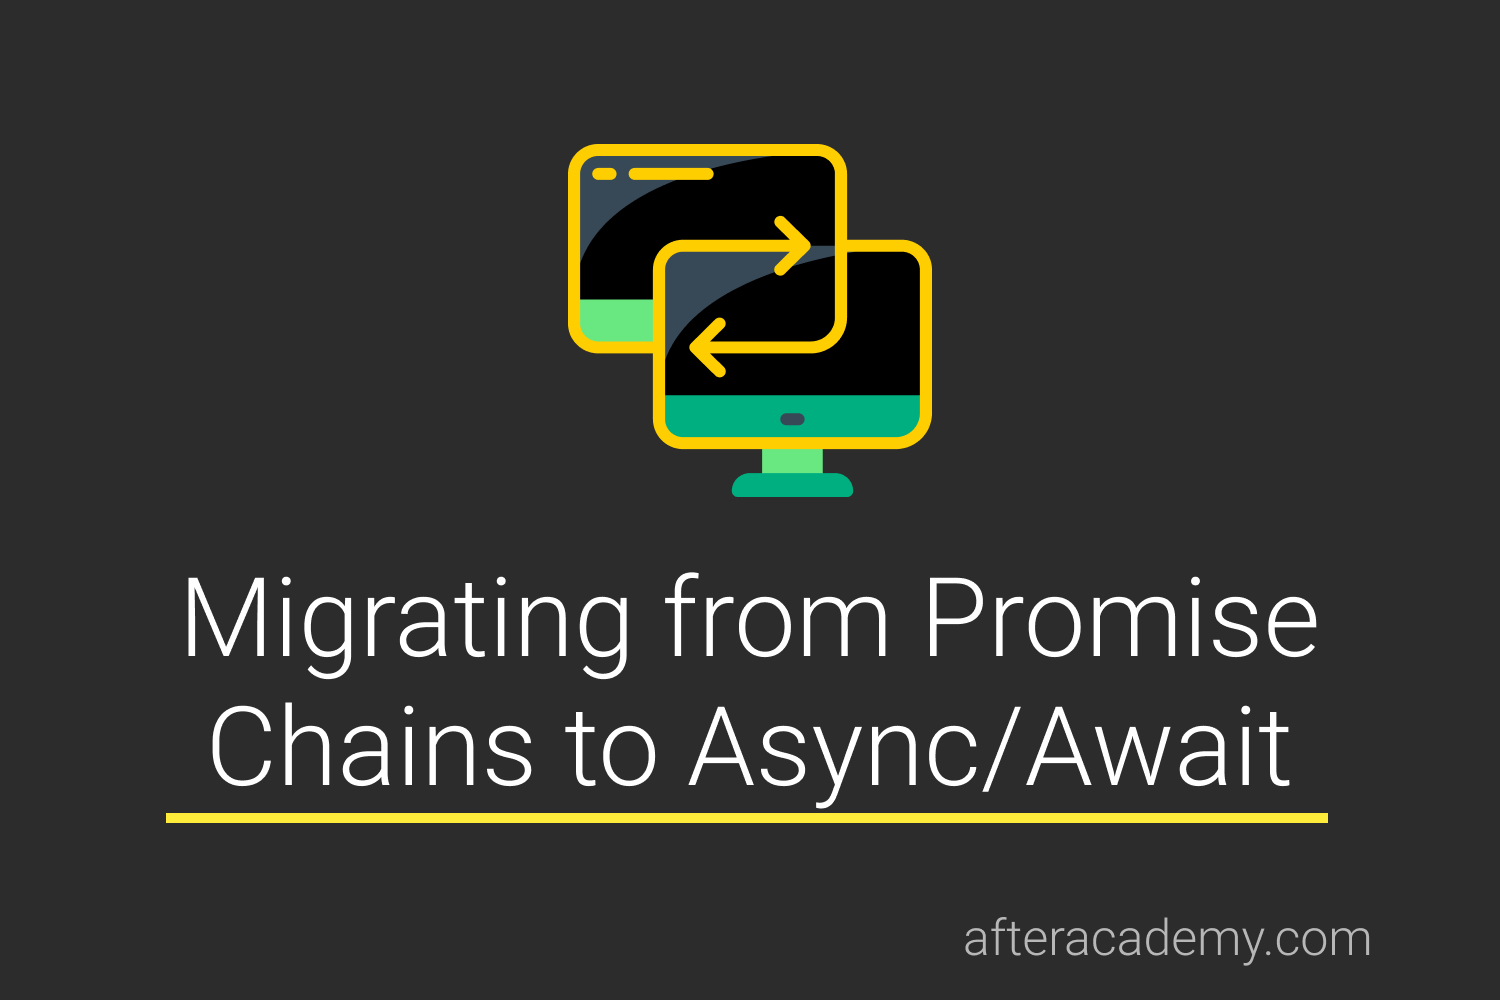 Migrating from Promise chains to Async/Await